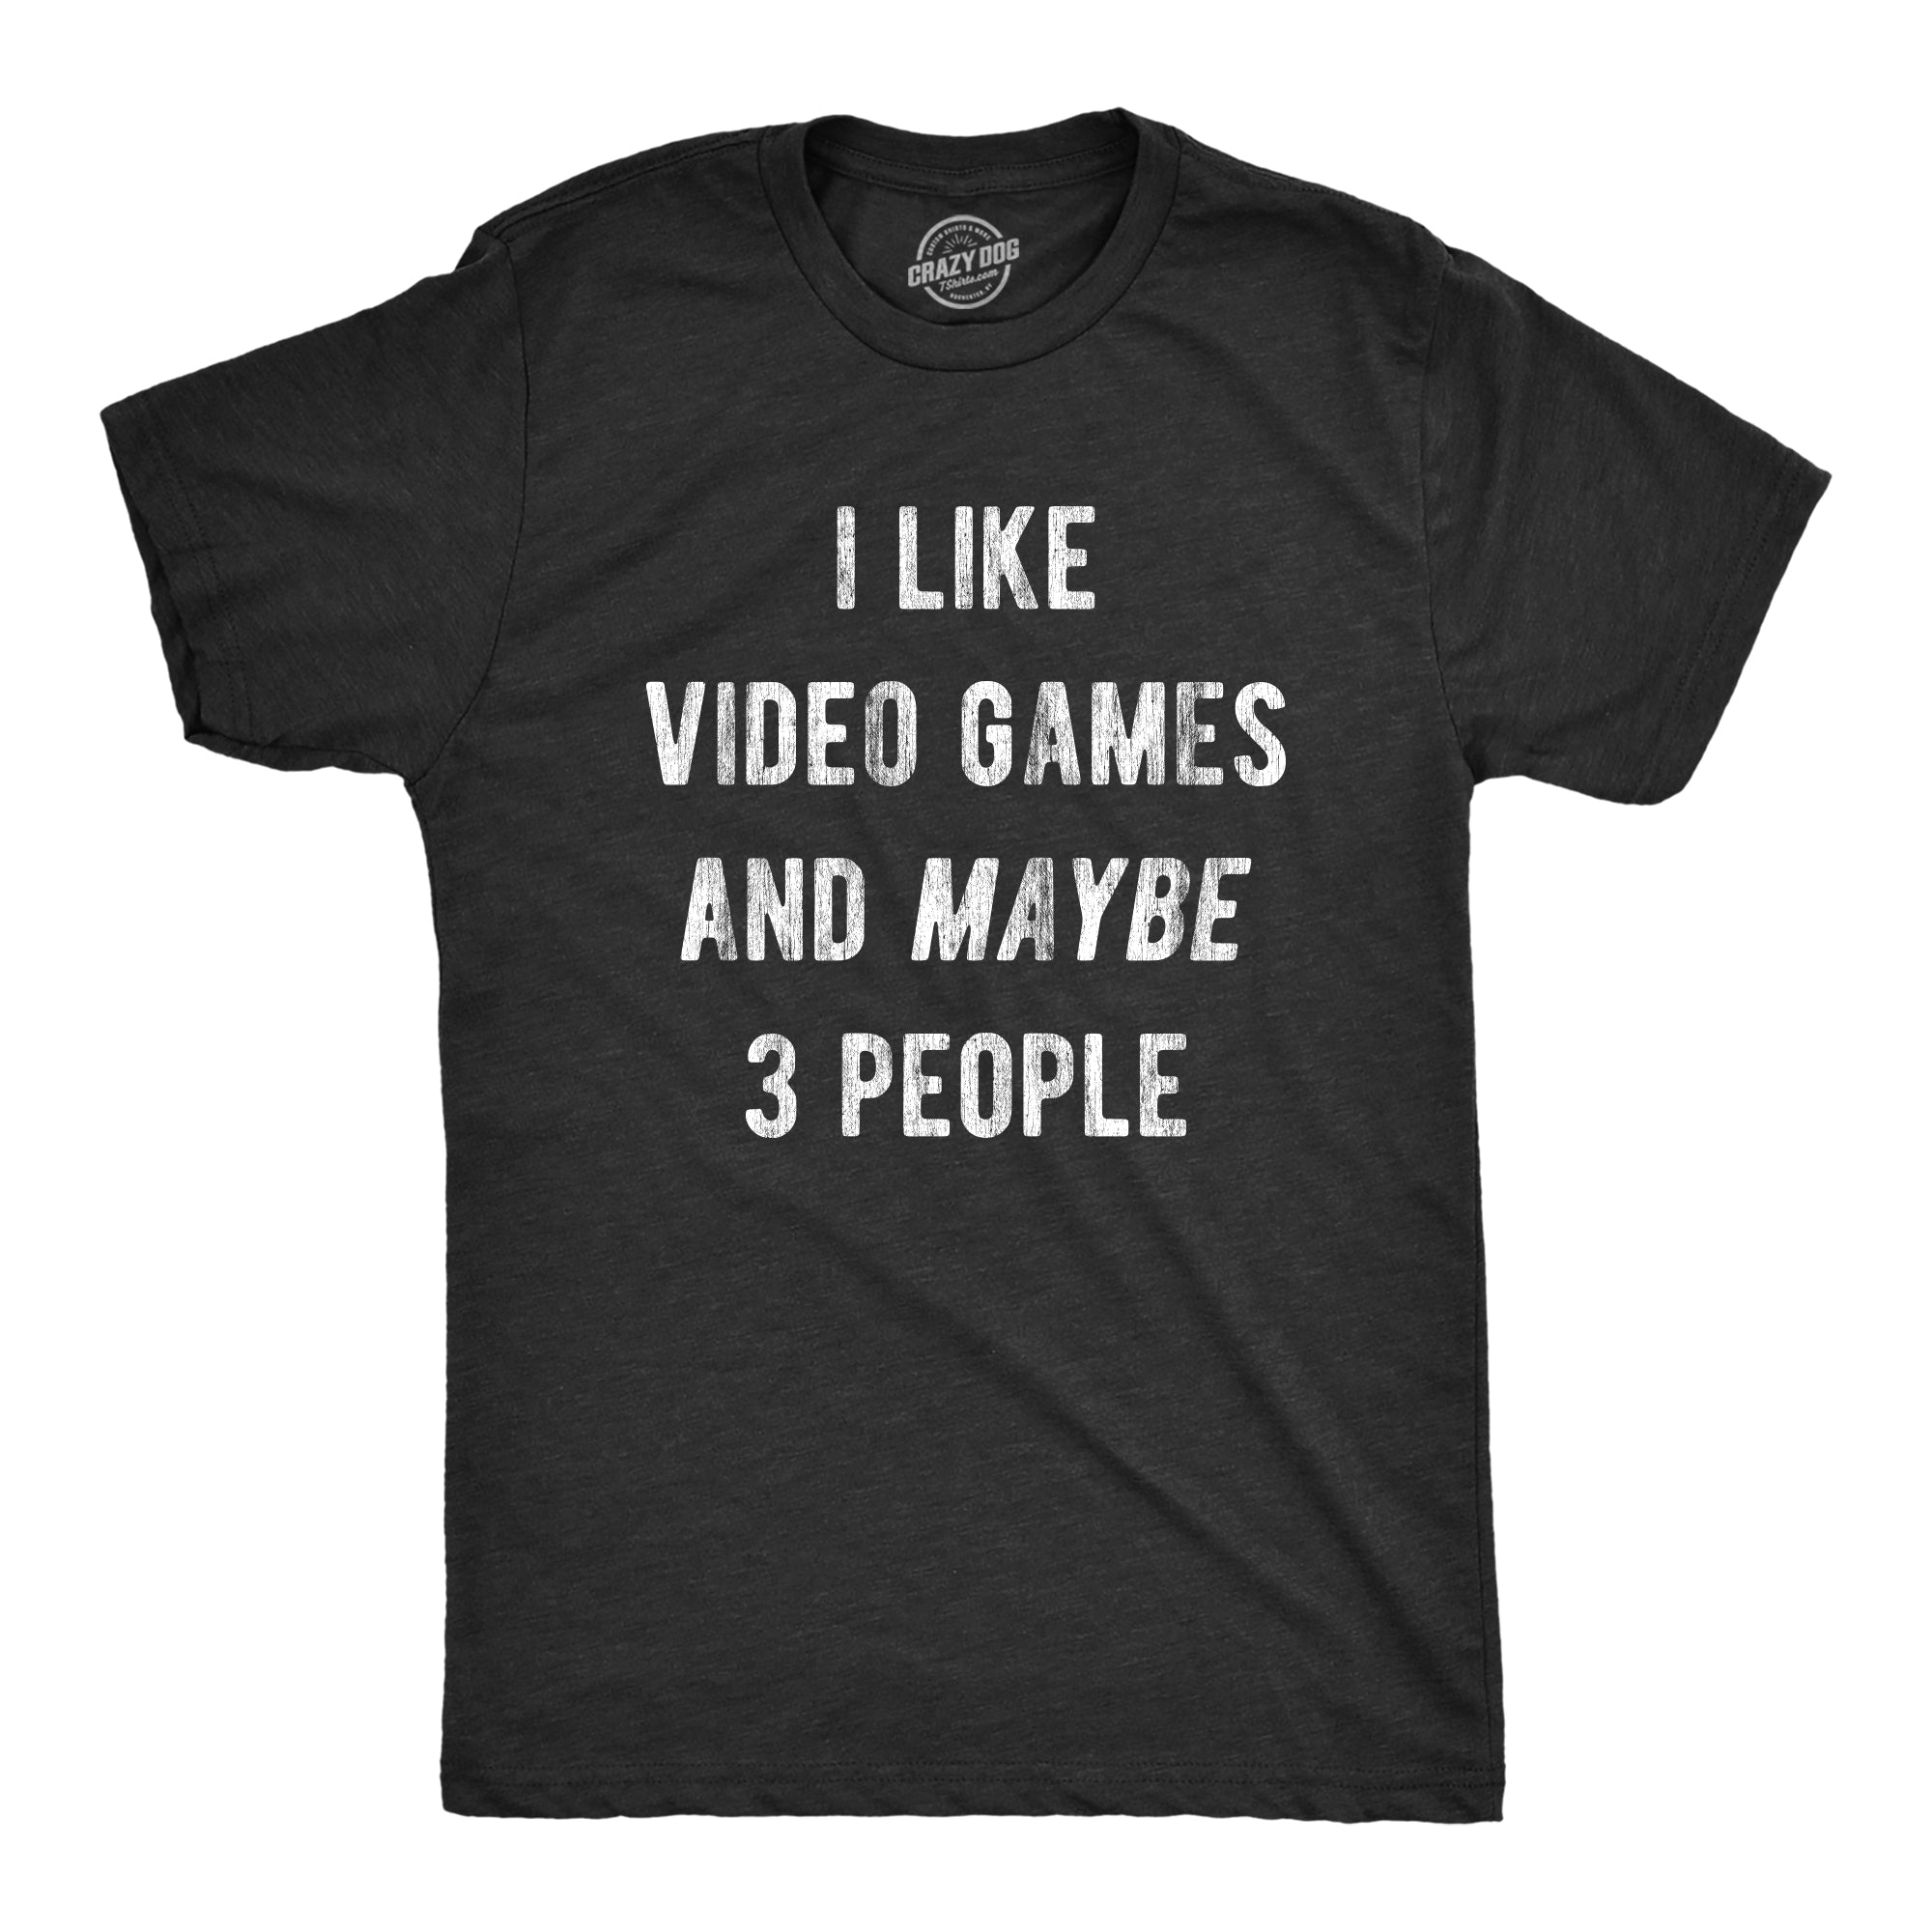 Funny Heather Black I Like Video Games And Maybe 3 People Mens T Shirt Nerdy Video Games introvert introvert Tee